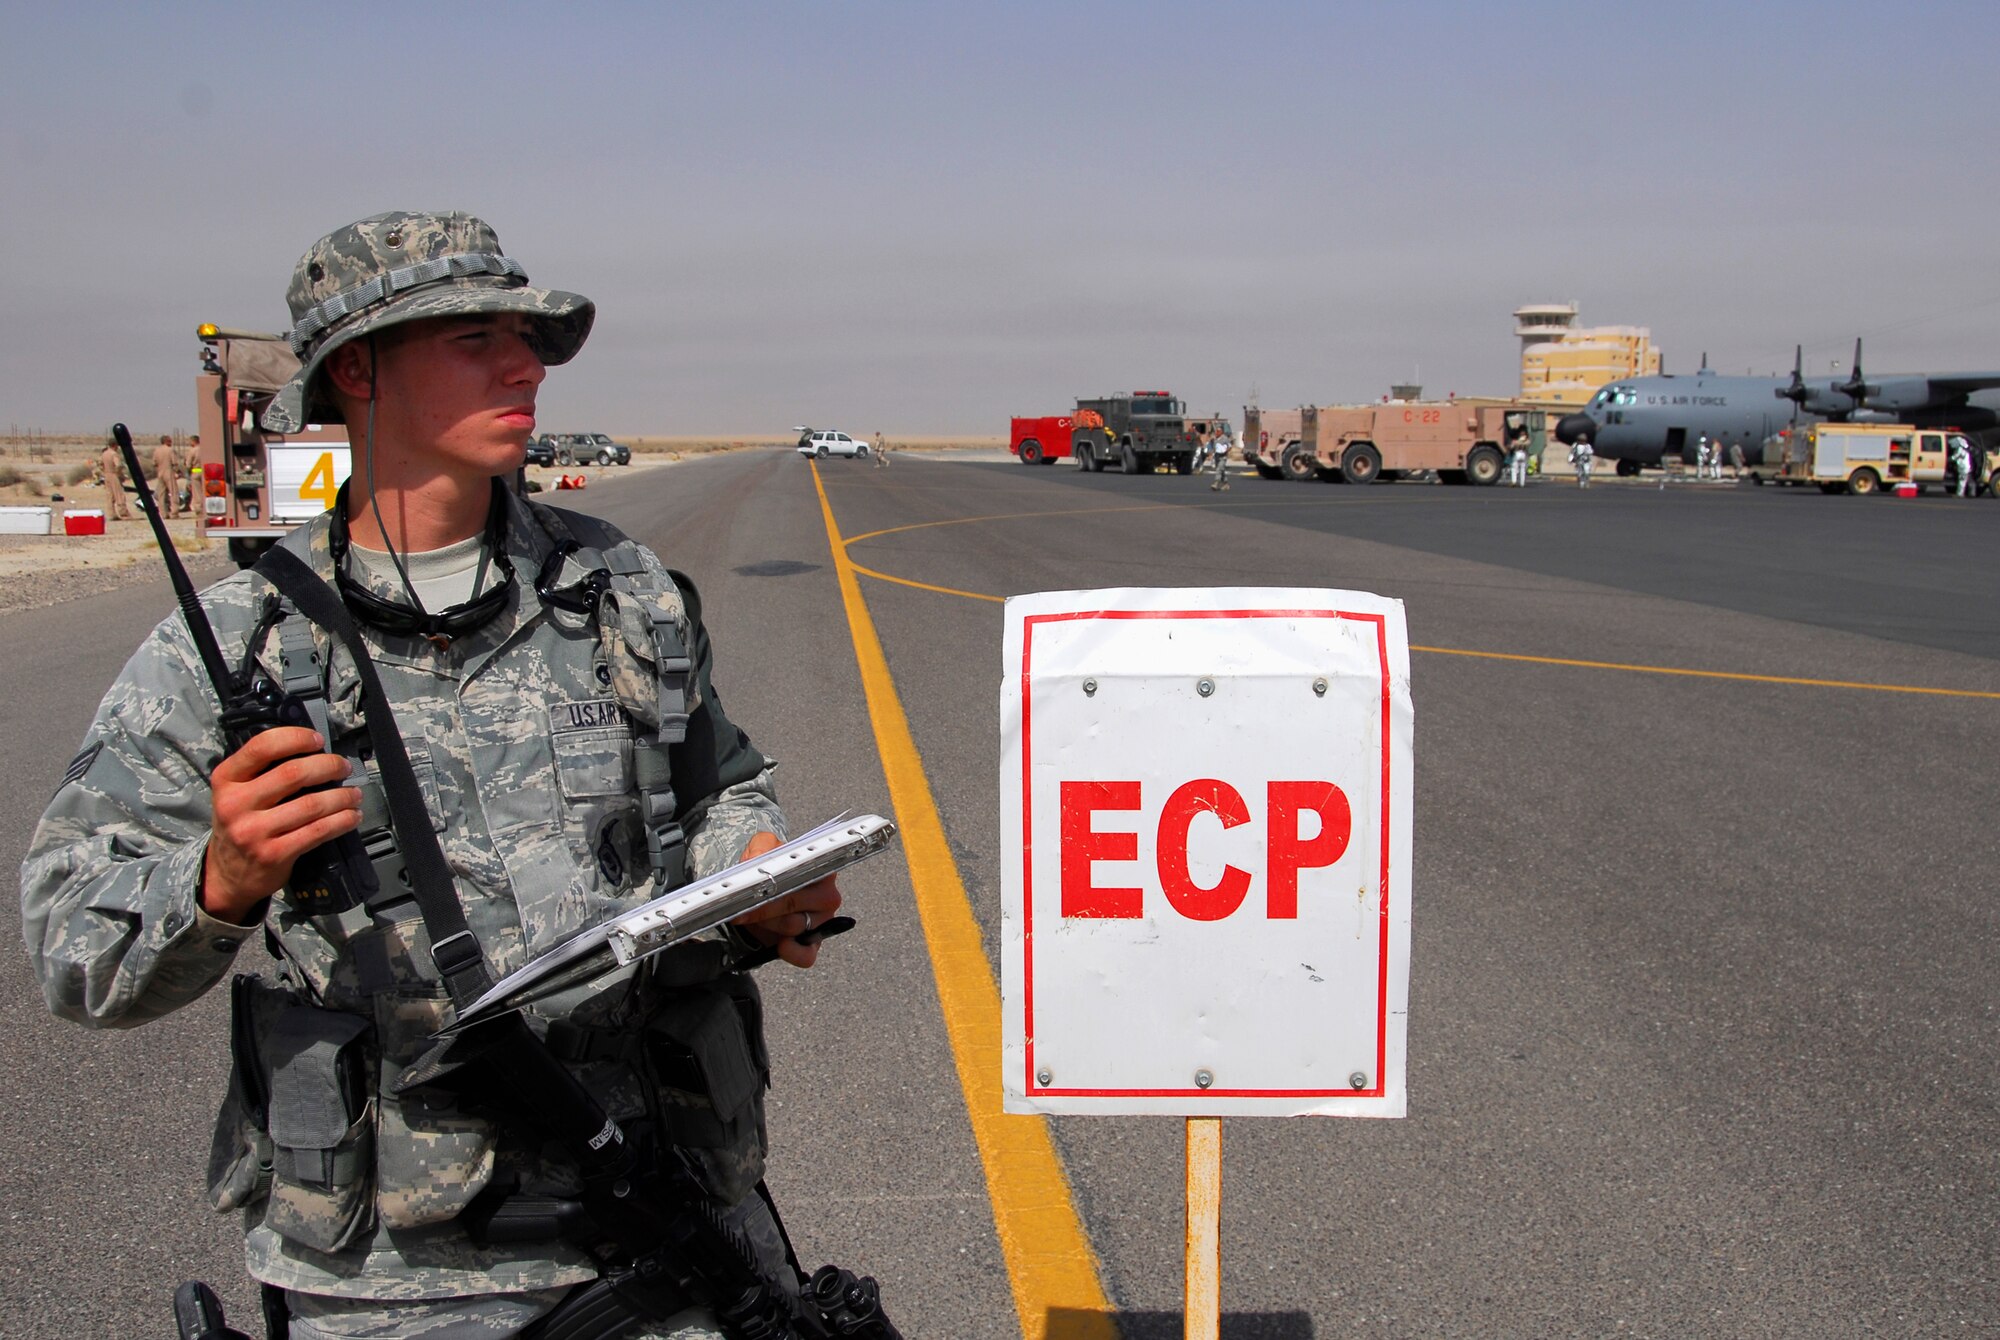 SOUTHWEST ASIA -- Senior Airman Mark Phillips, deployed to the 386th Expeditionary Security Forces Squadron, controls entry for emergency responders as an Entry Control Point guard June 26, 2008, during a major accident response exercise at an air base in the Persian Gulf Region. As a guard at this vital post Airman Phillips ensures only authorized personnel enter the incident scene. The purpose of the MARE is to evaluate the Wing's ability to respond to and recover from an aircraft mishap and mass casualty incident. (U.S. Air Force photo/ Staff Sgt. Patrick Dixon)